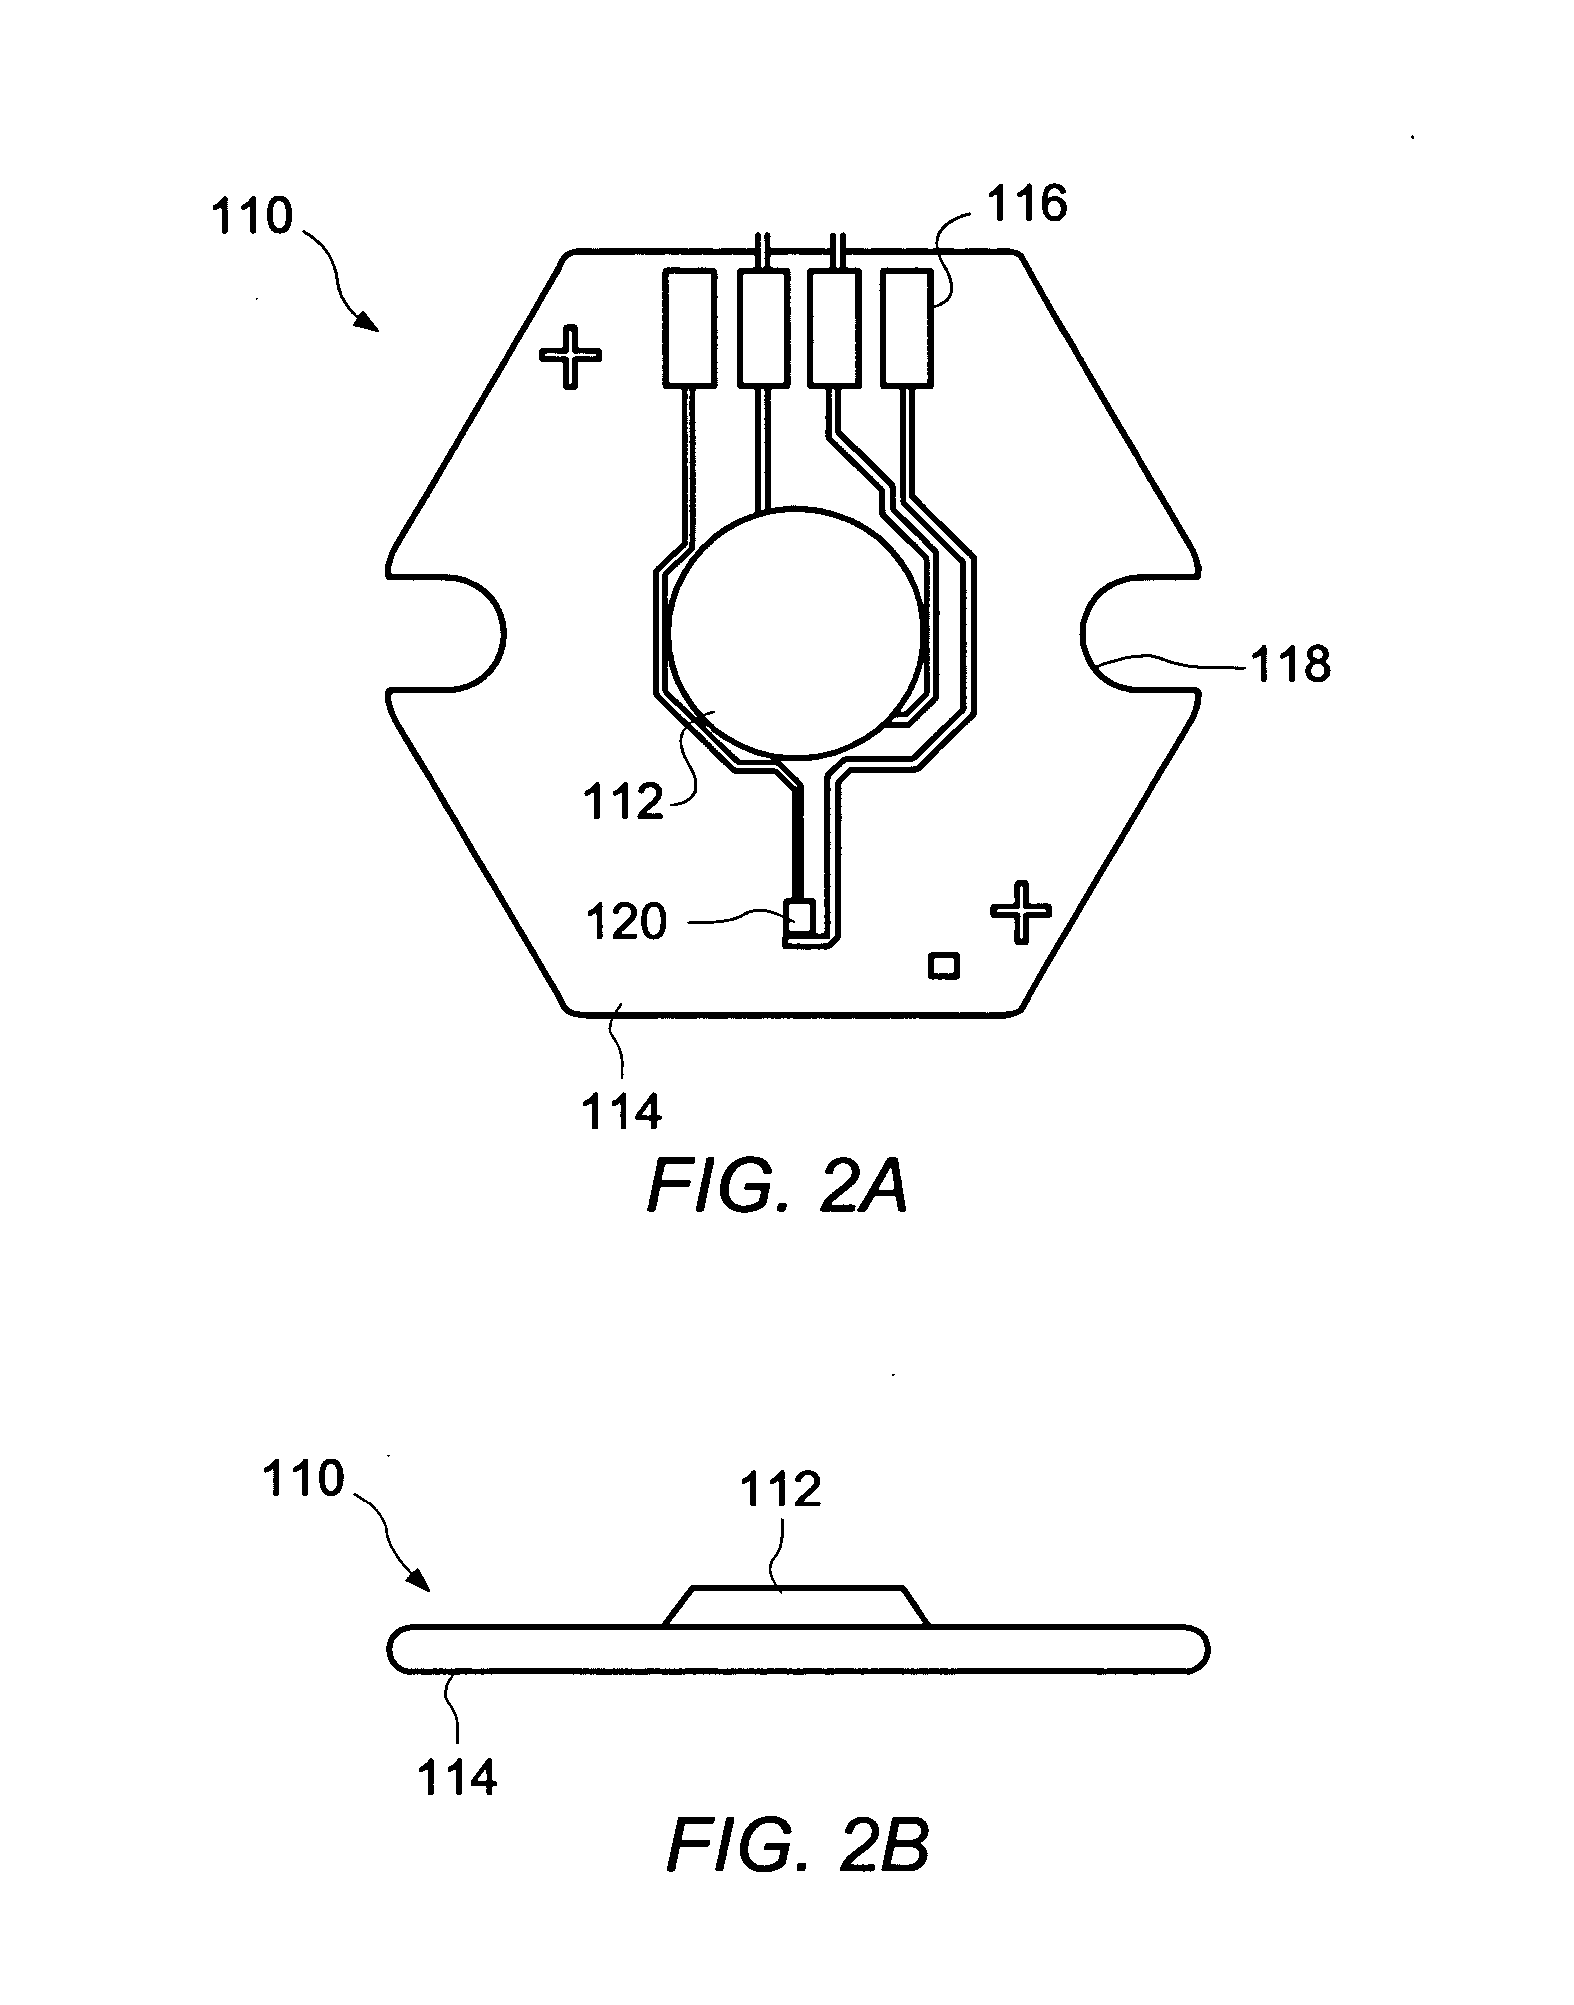 Lens forming systems and methods